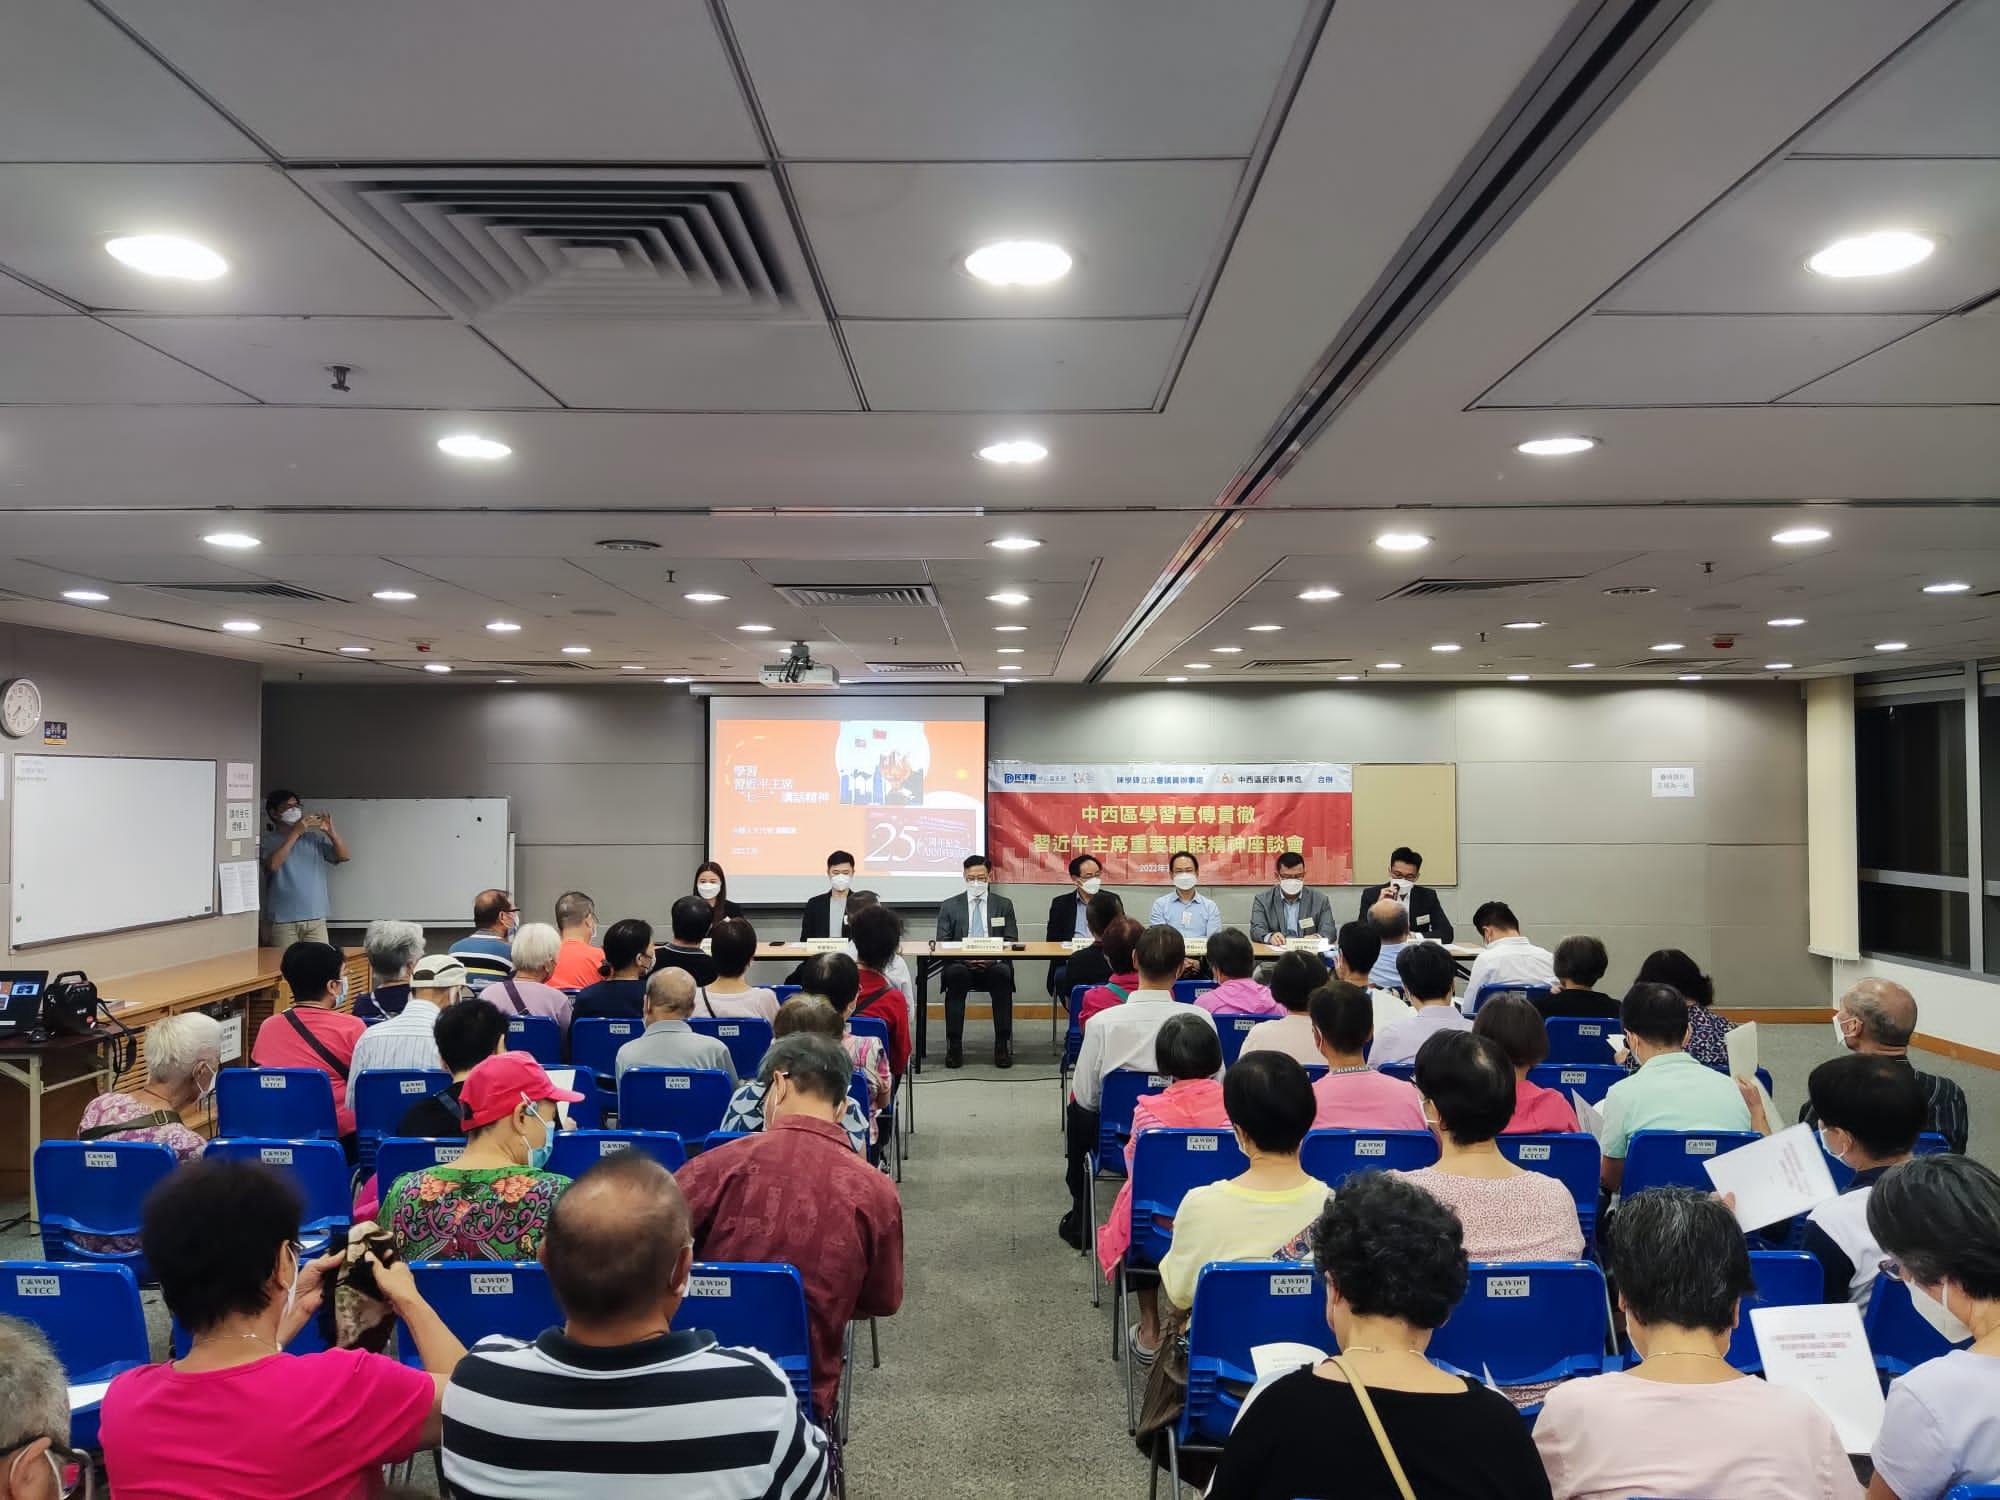 The Central and Western District Office, together with the Central and Western Branch of the Democratic Alliance for the Betterment and Progress of Hong Kong and the Office of the Legislative Council Member Mr Chan Hok-fung, jointly held the "Session to Learn About, Promote and Implement the Spirit of President Xi's Important Speech in Central and Western District" at Kennedy Town Community Complex on July 29. Photo shows participants listening attentively to the speakers.